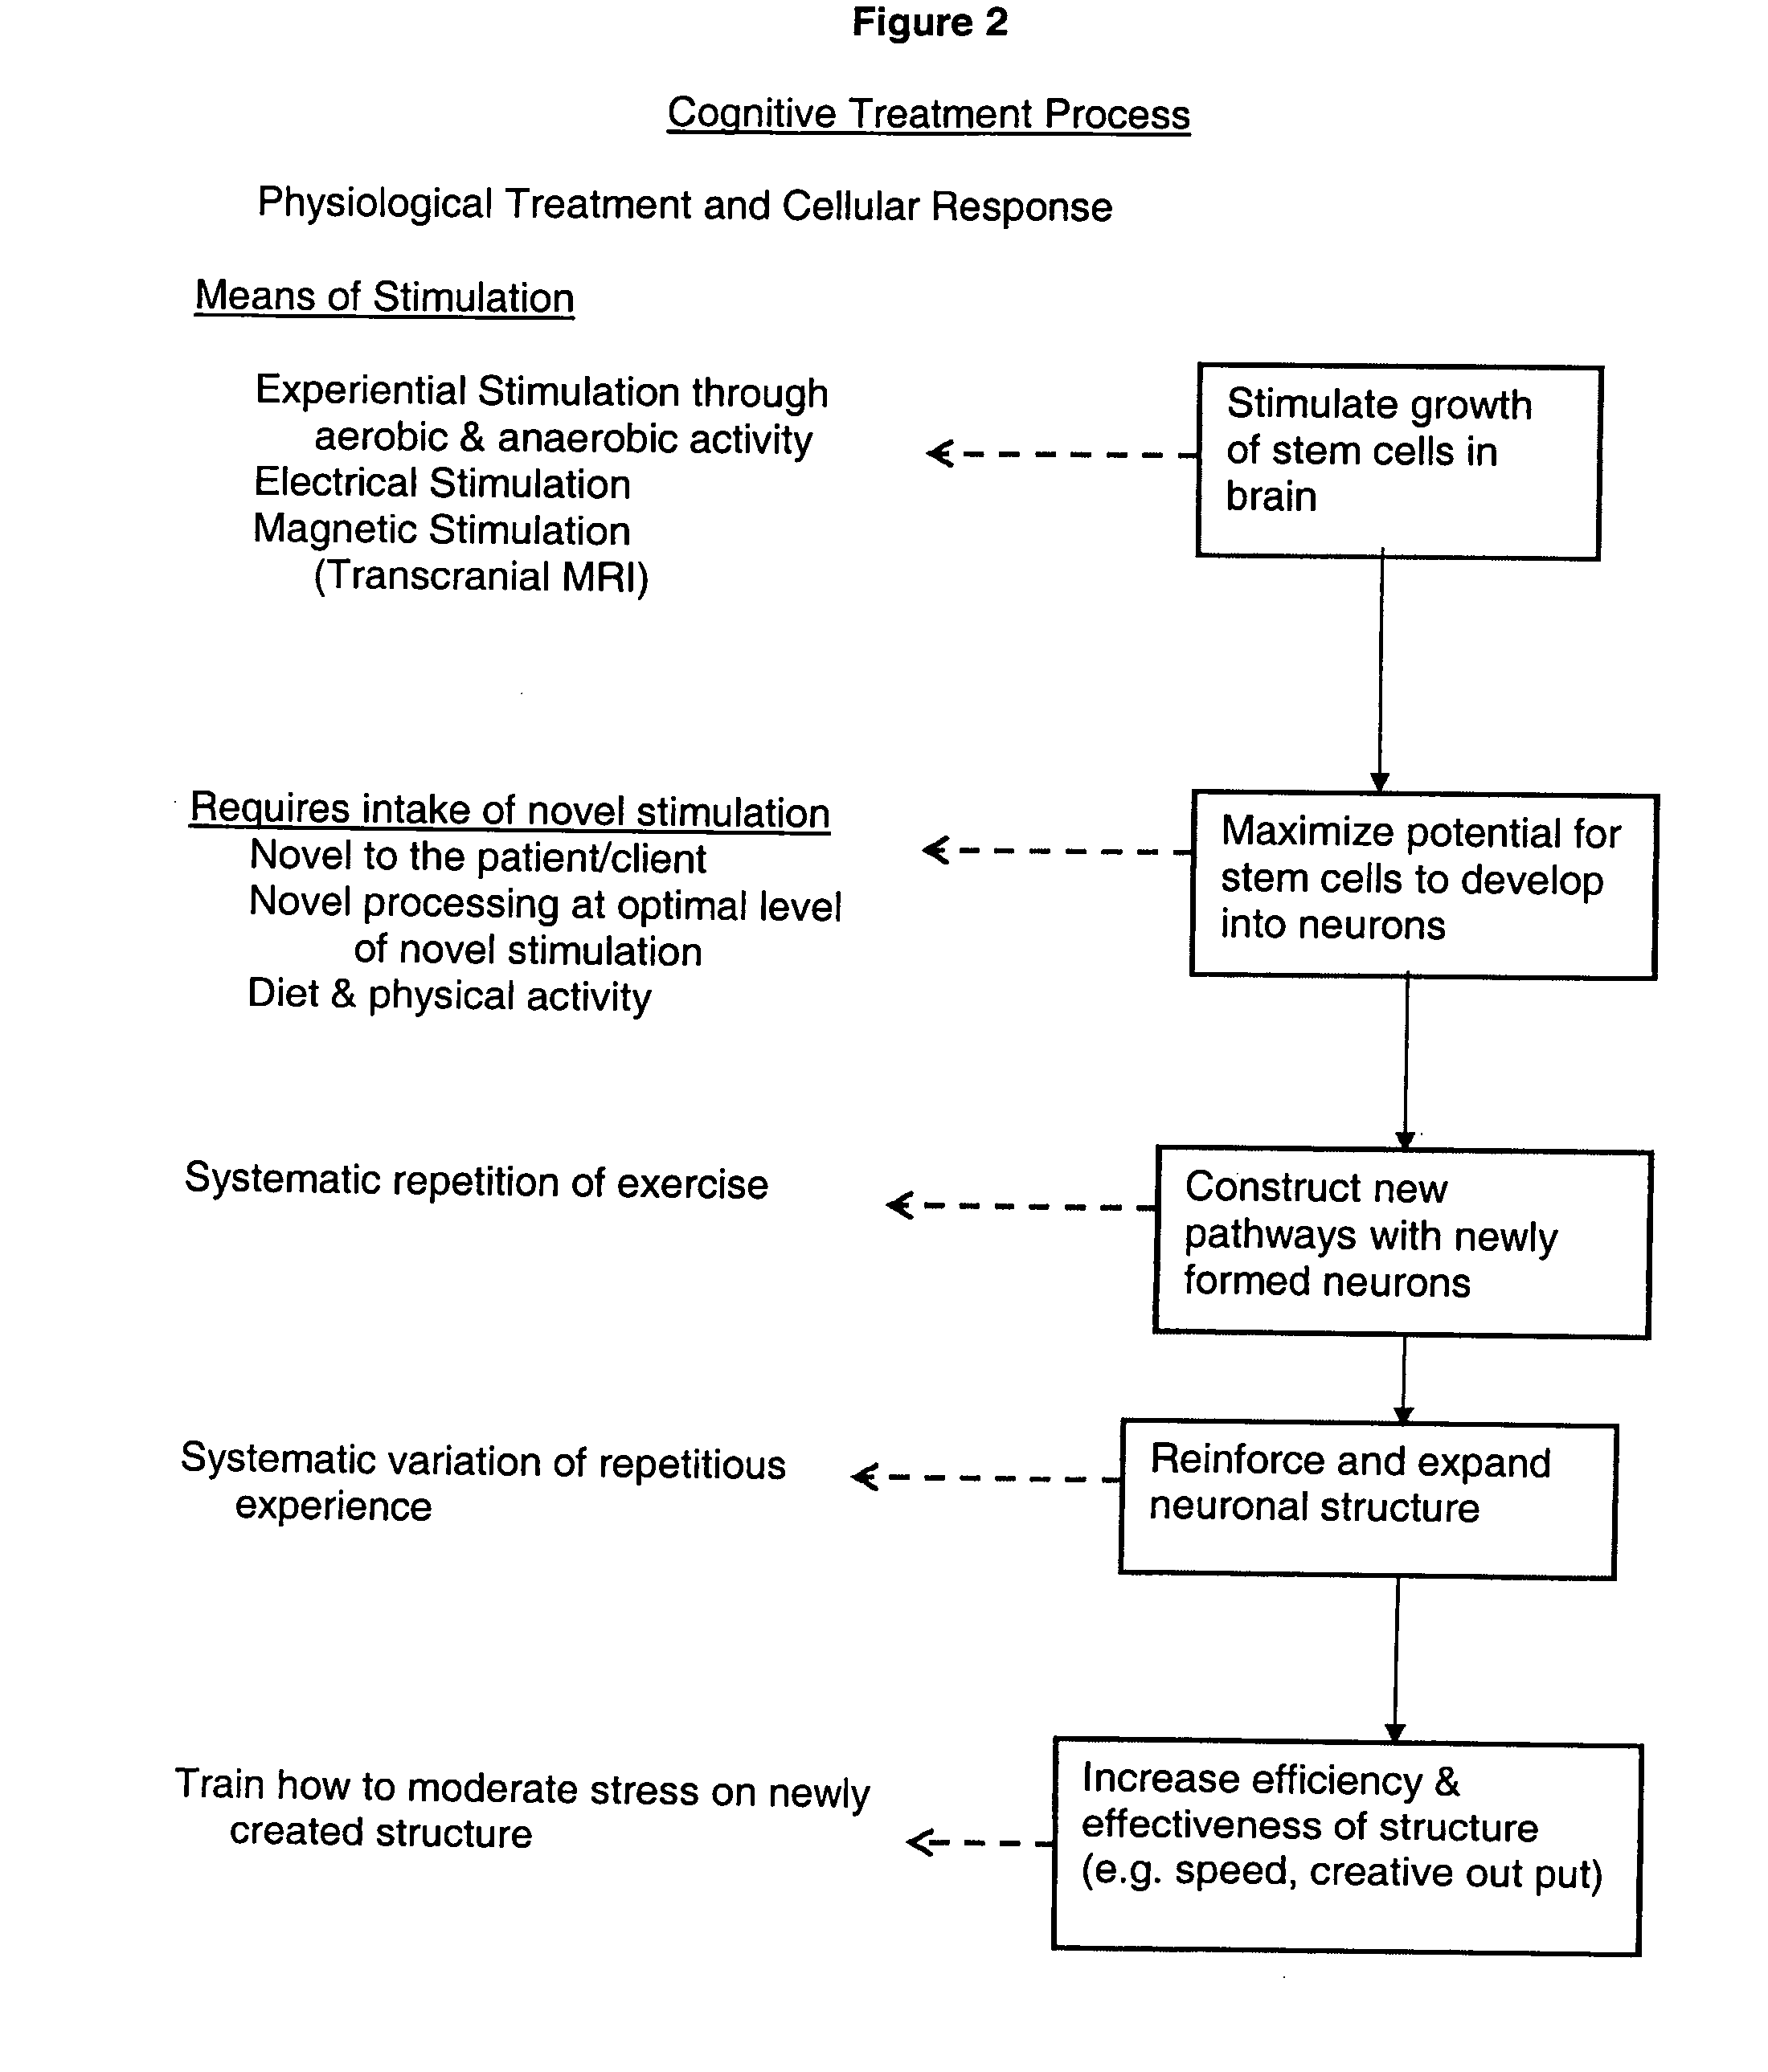 Methods for cognitive treatment